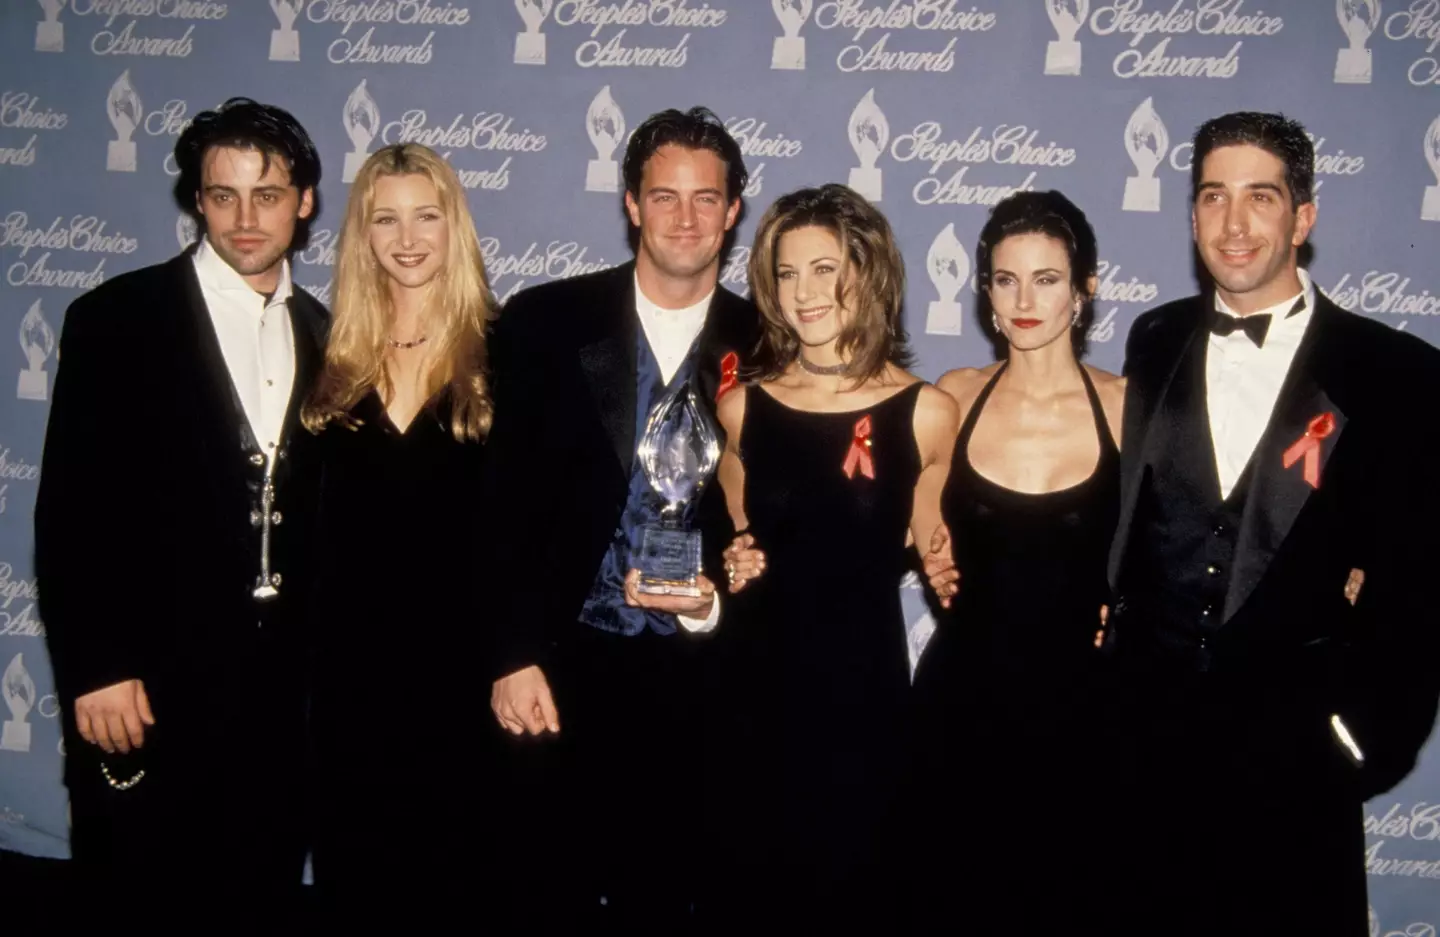 The cast of Friends are said to be 'in talks' for a reunion in Perry's honor.